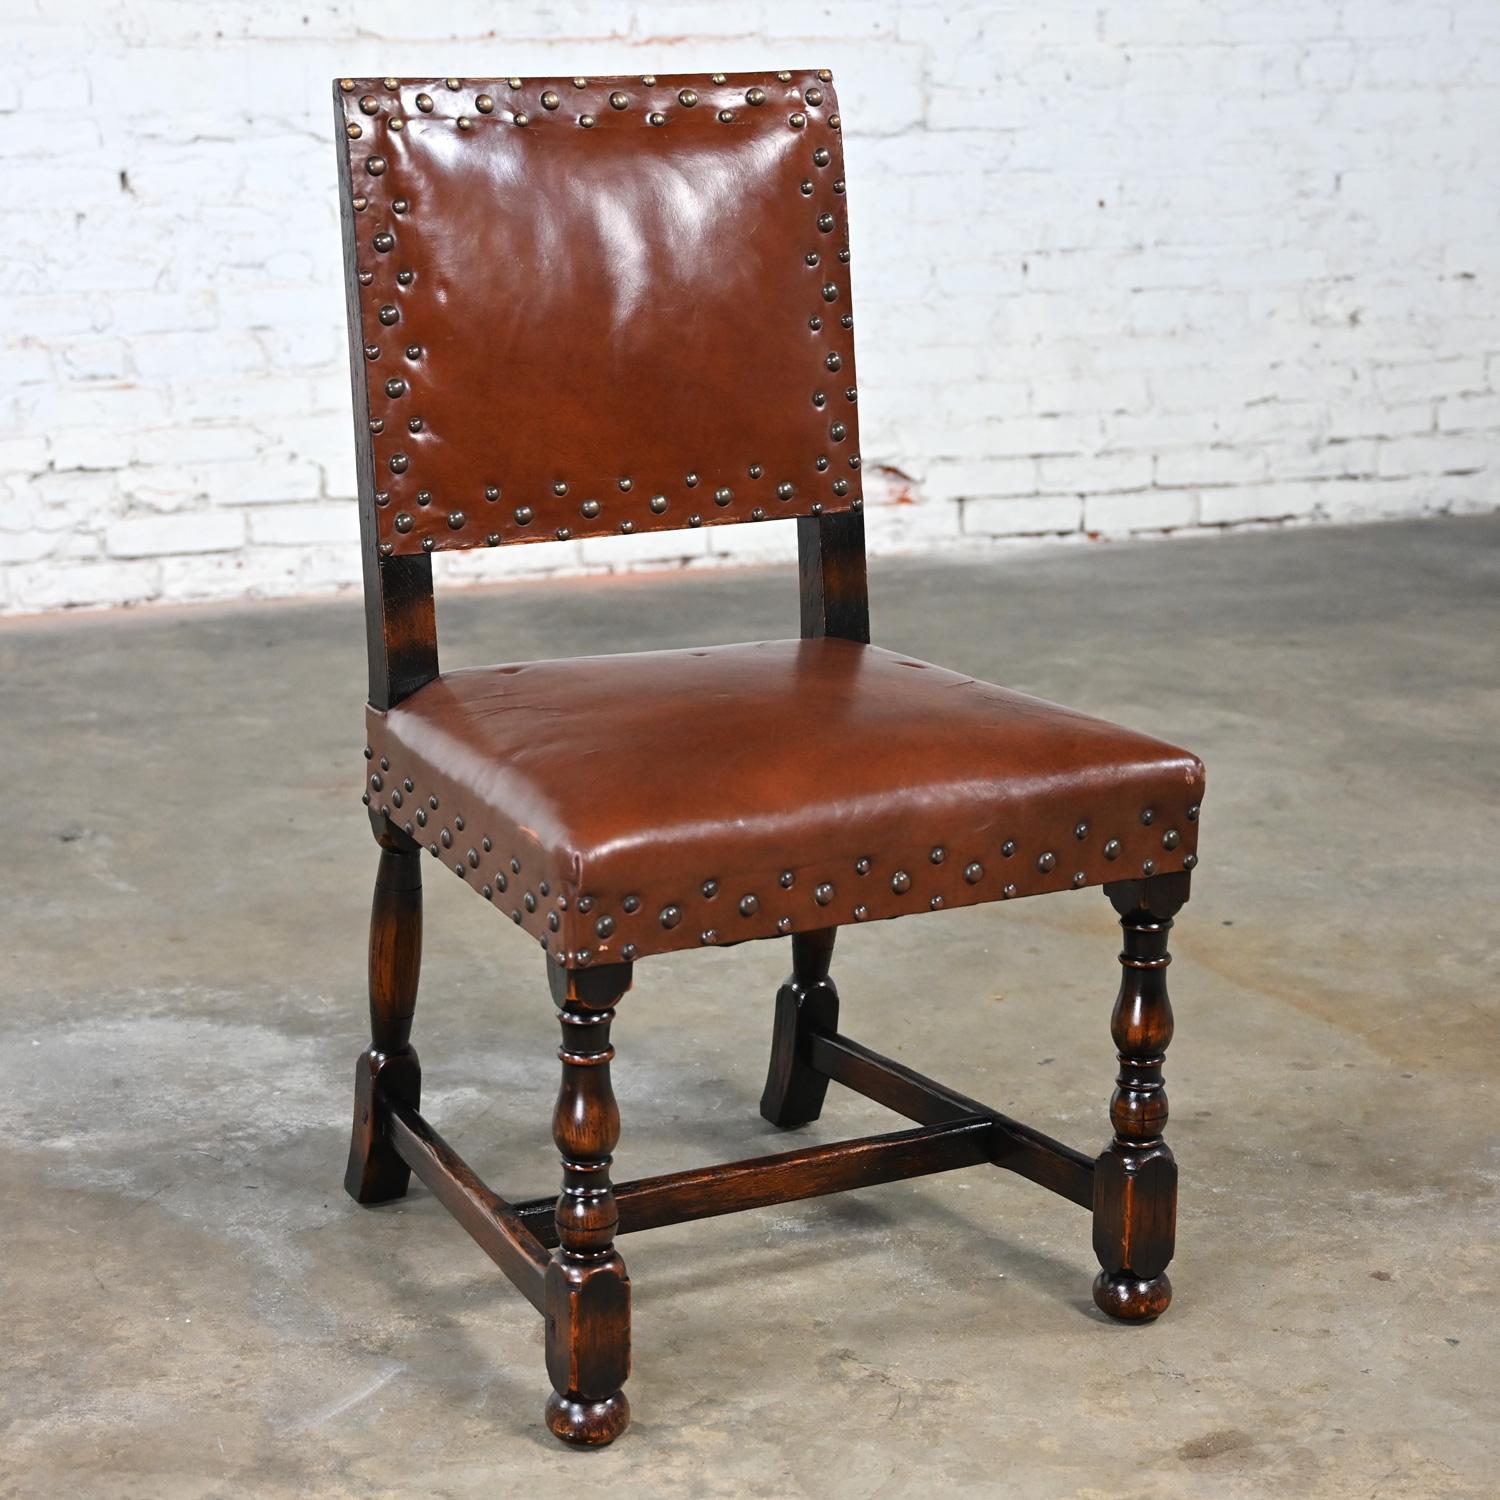 Marvelous vintage Spanish Revival Century Furniture side chair comprised of a dark stained oak frame, & cognac leather seat & back with antiqued brass nail head trim details. Beautiful condition, keeping in mind that this is vintage and not new so